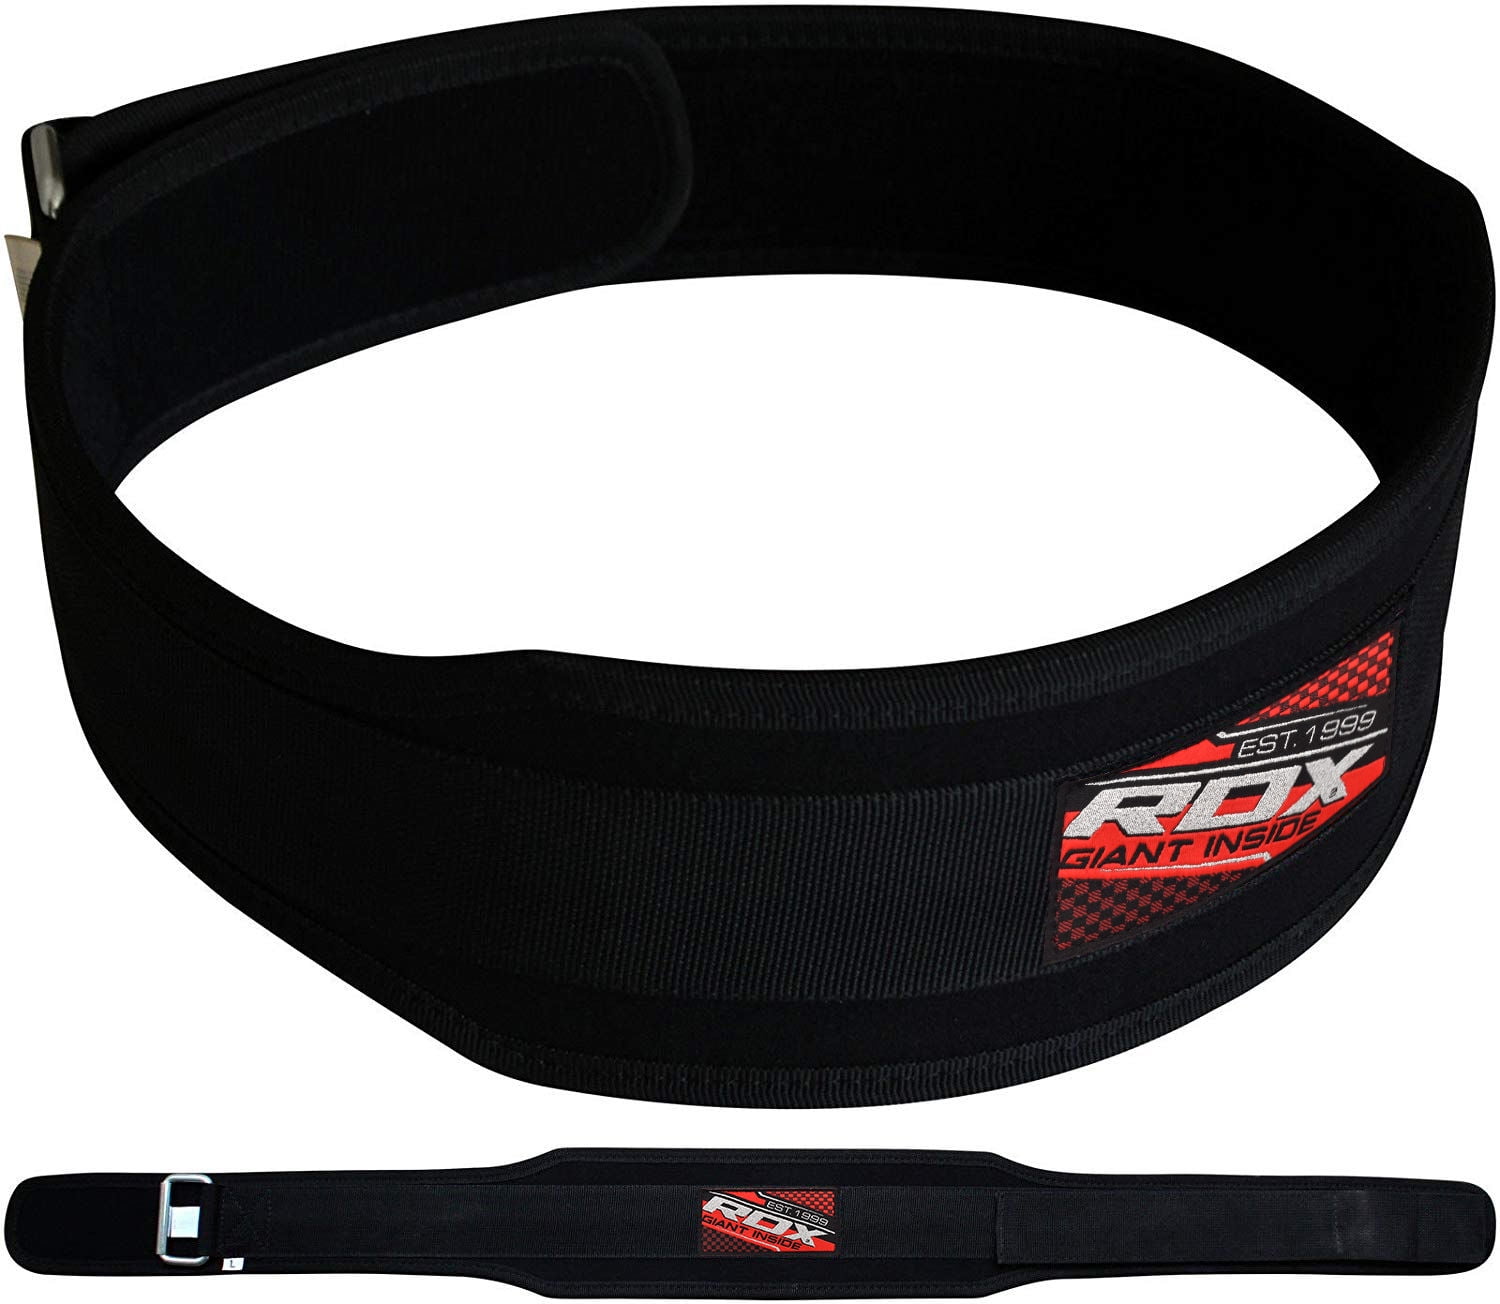 Rdx Gym Weight Lifting Belt Back Training Support Fitness